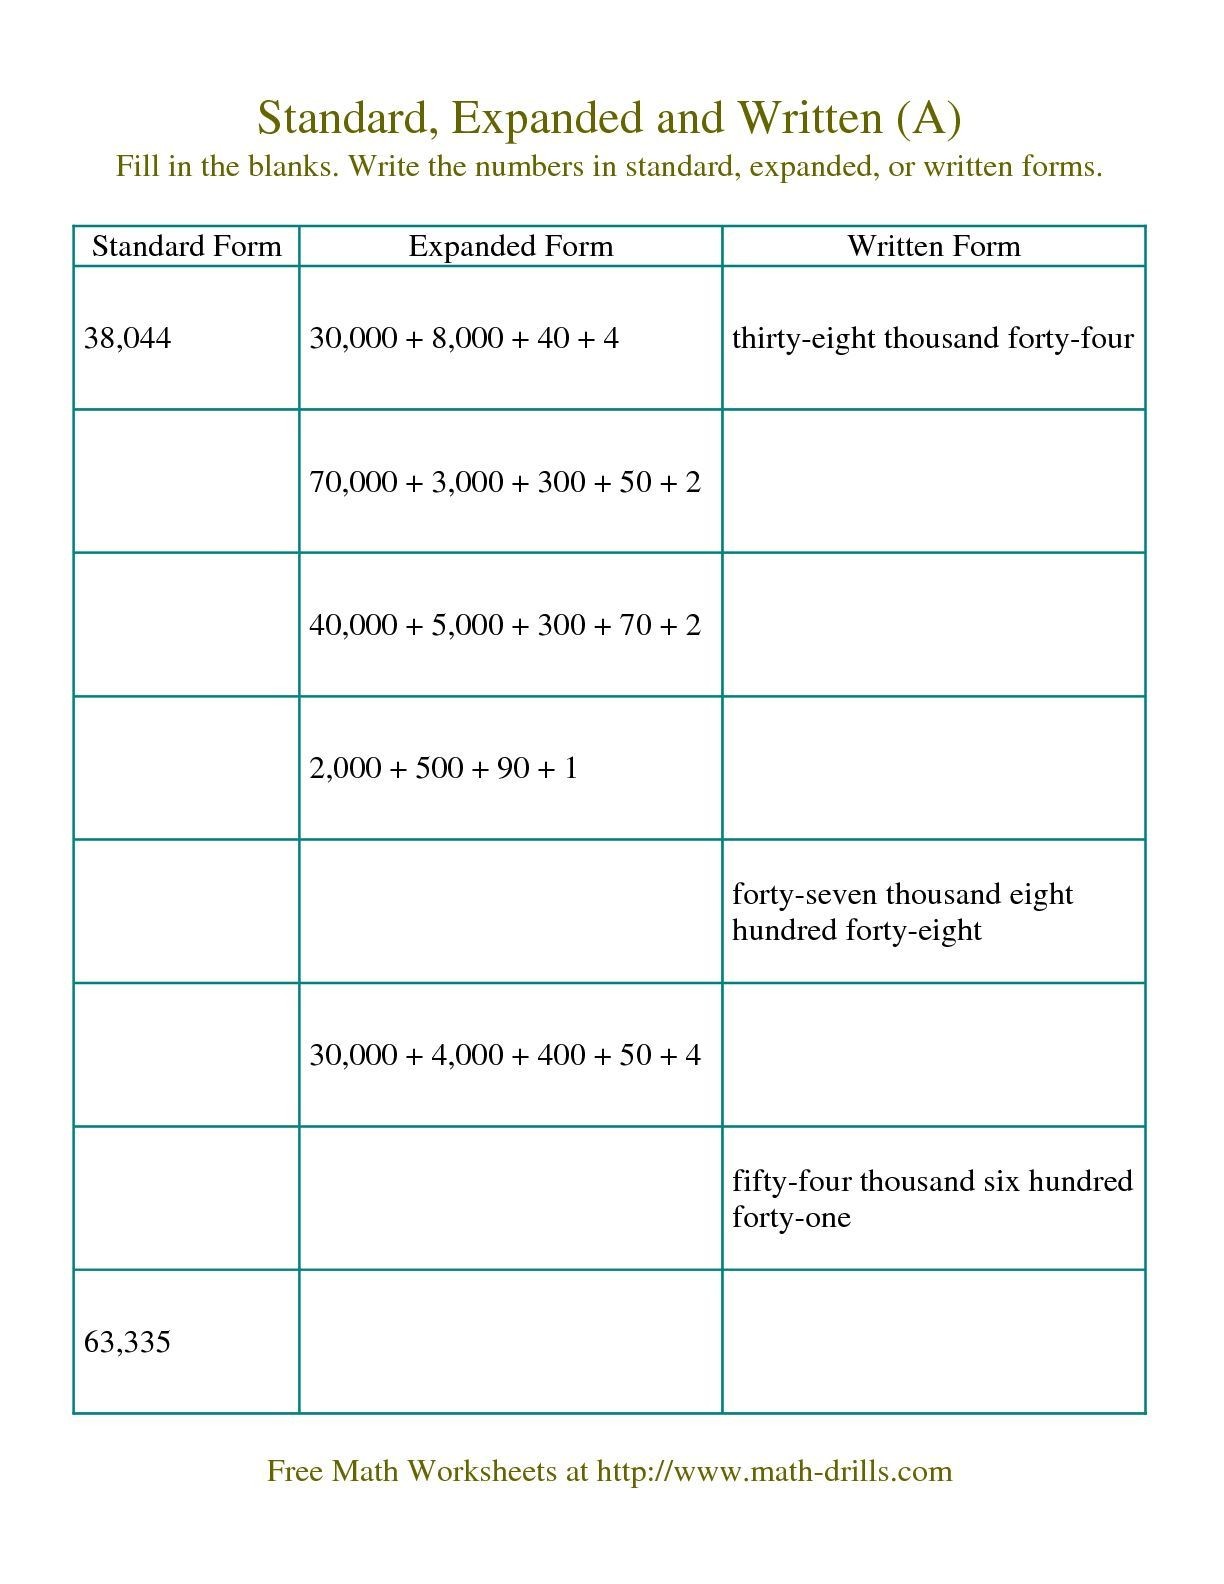 Standard Form Expanded Form Word Form Worksheets Pdf I Will Tell You